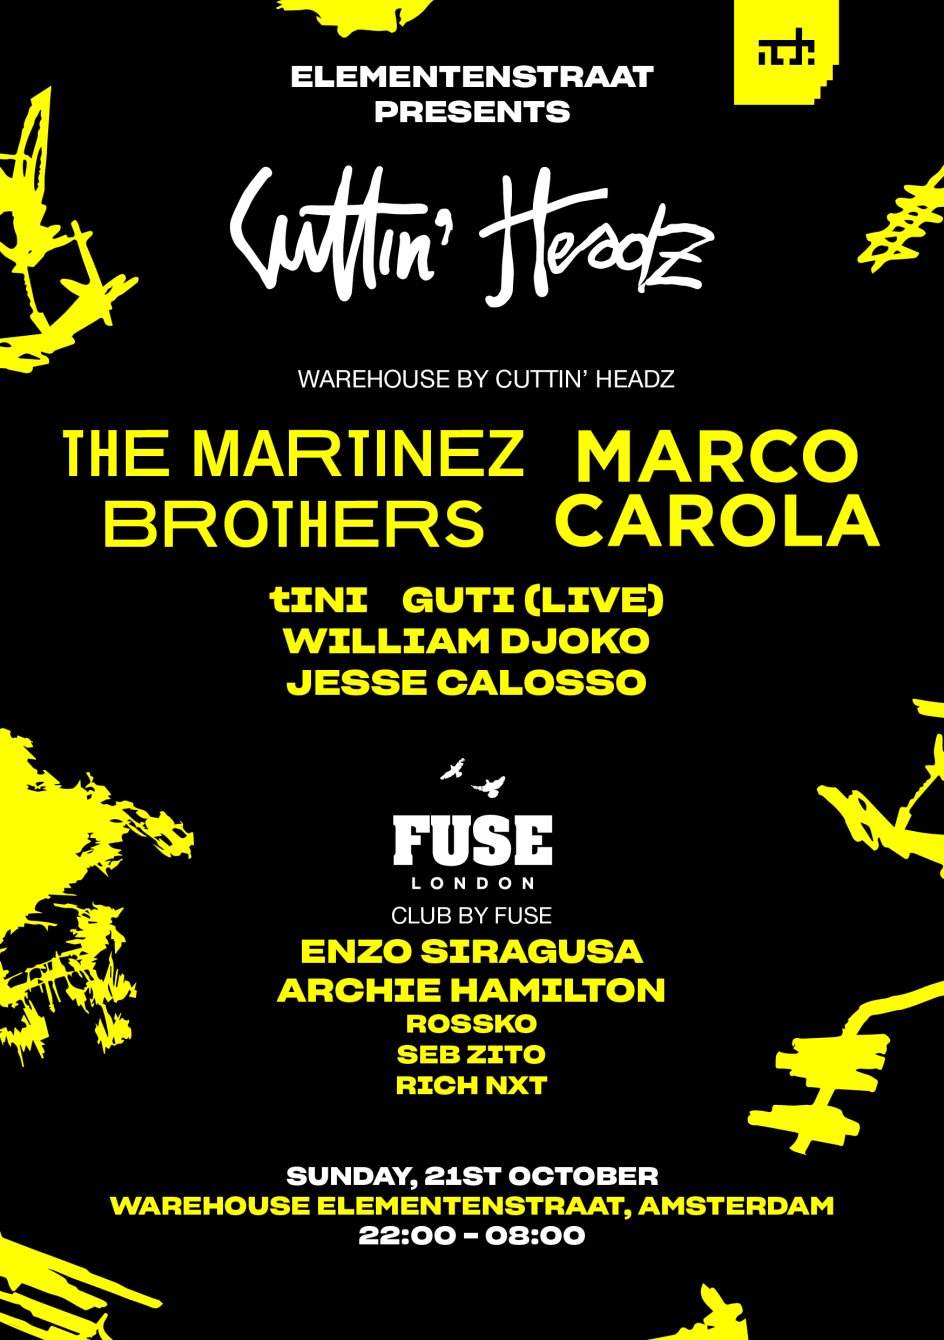 Cuttin' Headz & Fuse London with The Martinez Brothers, Marco Carola and More - Página frontal